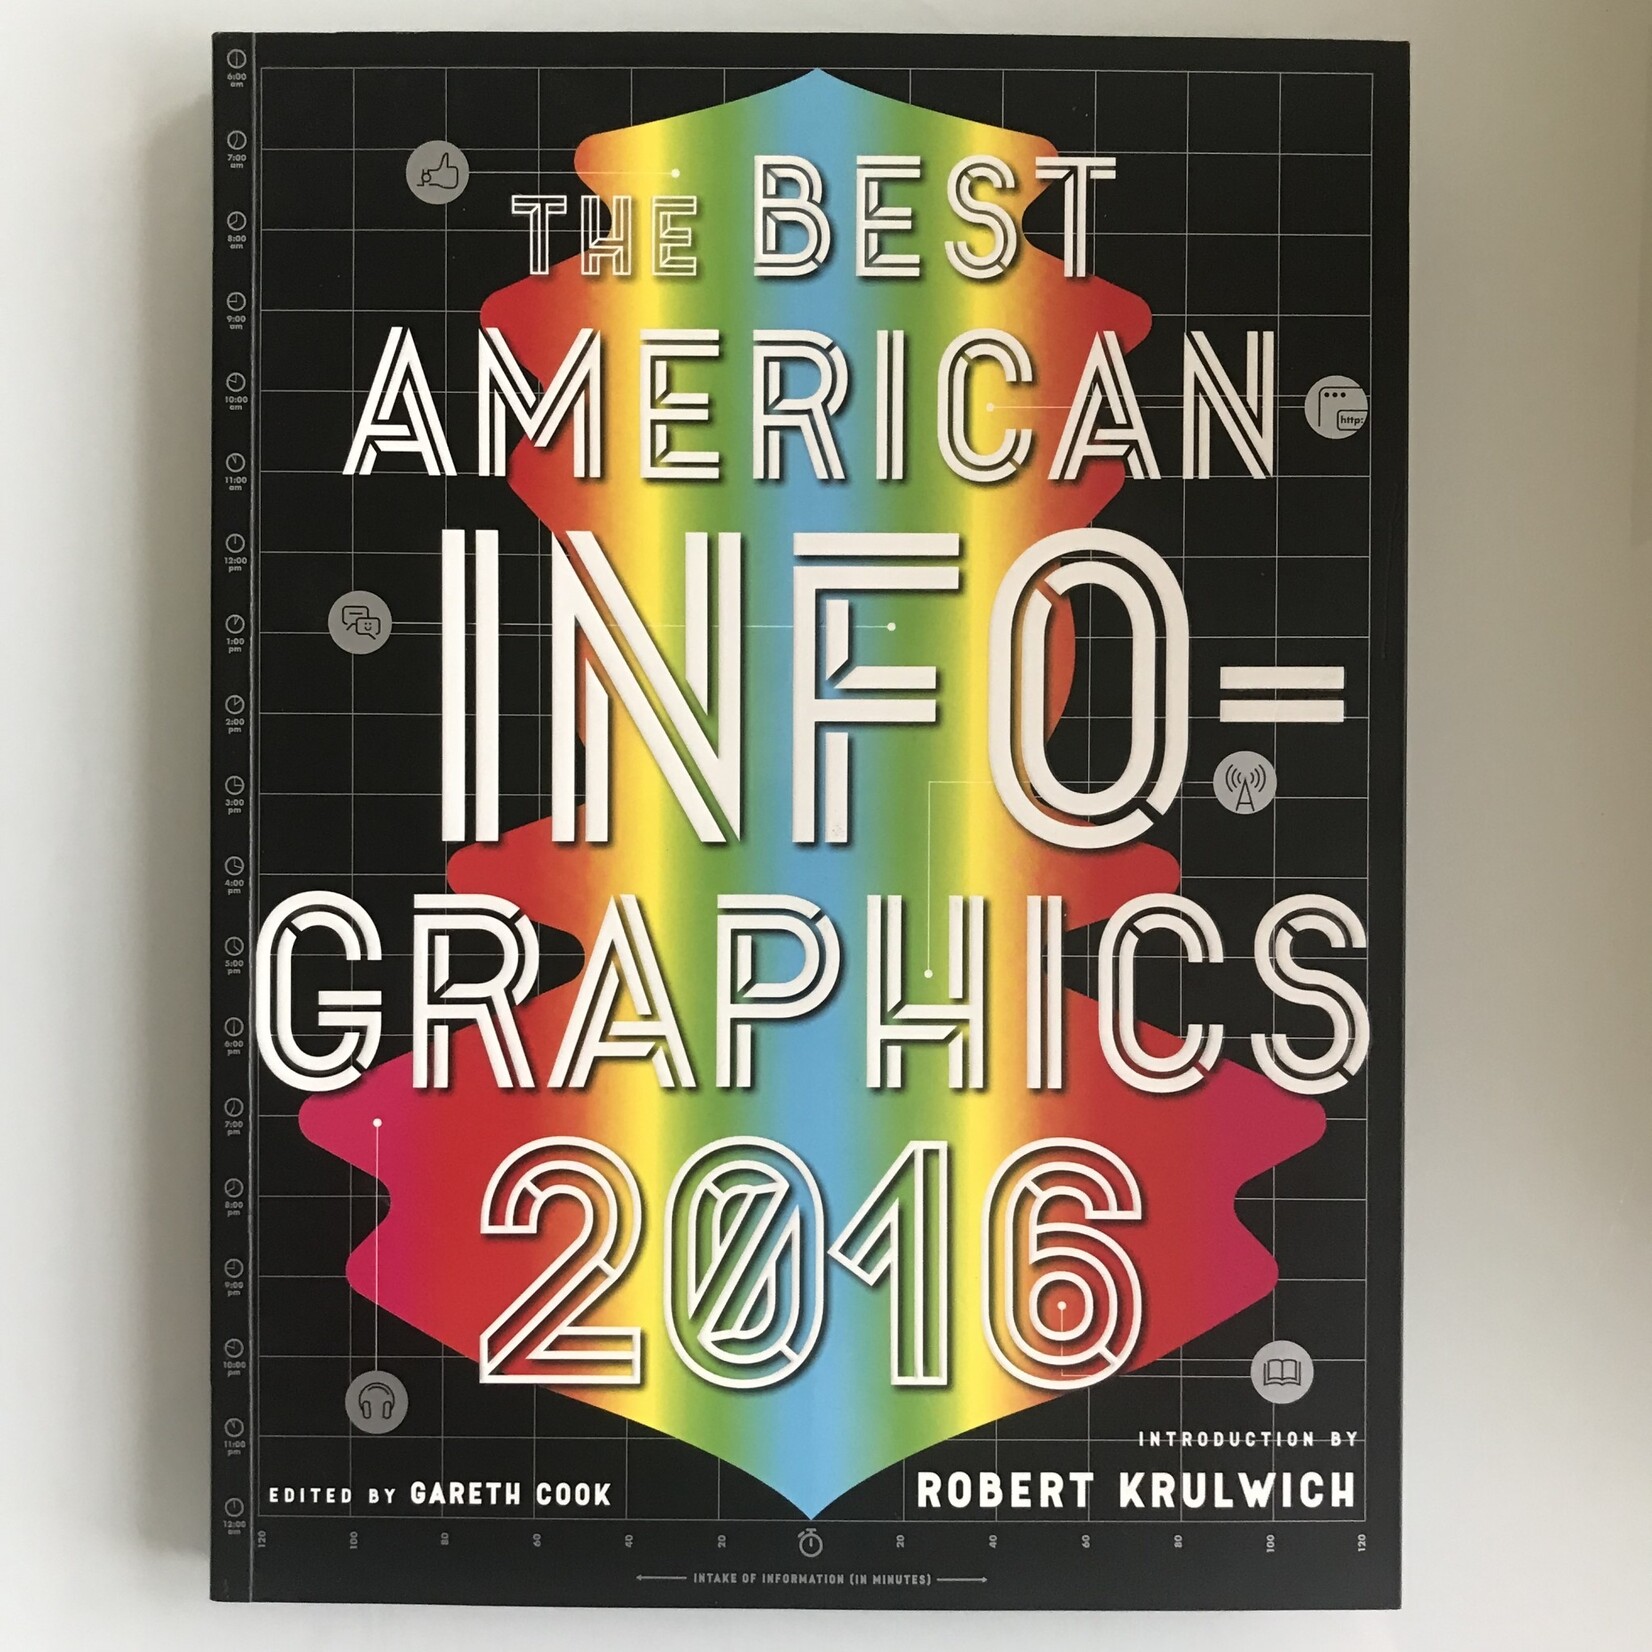 Gareth Cook (Editor) - Best American Infographics 2016 - Paperback (USED - LN)